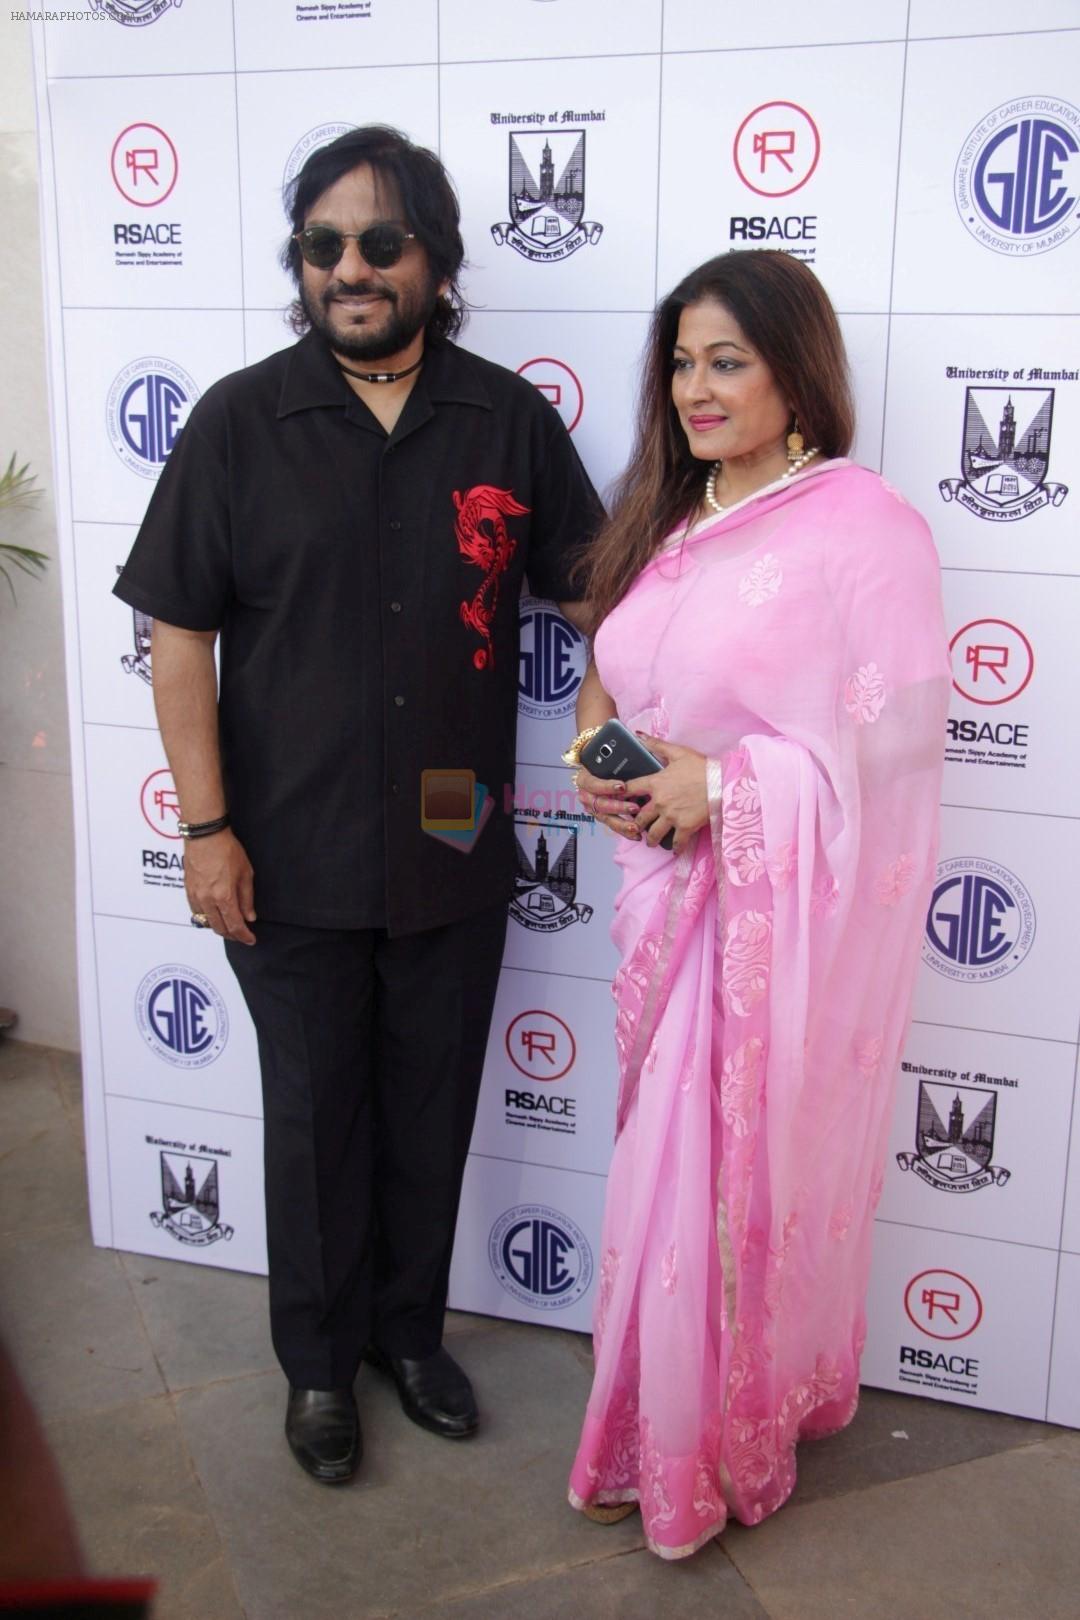 Roop Kumar Rathod, Sonali Rathod at the Launch of Ramesh Sippy Academy Of Cinema & Entertainment on 9th March 2017